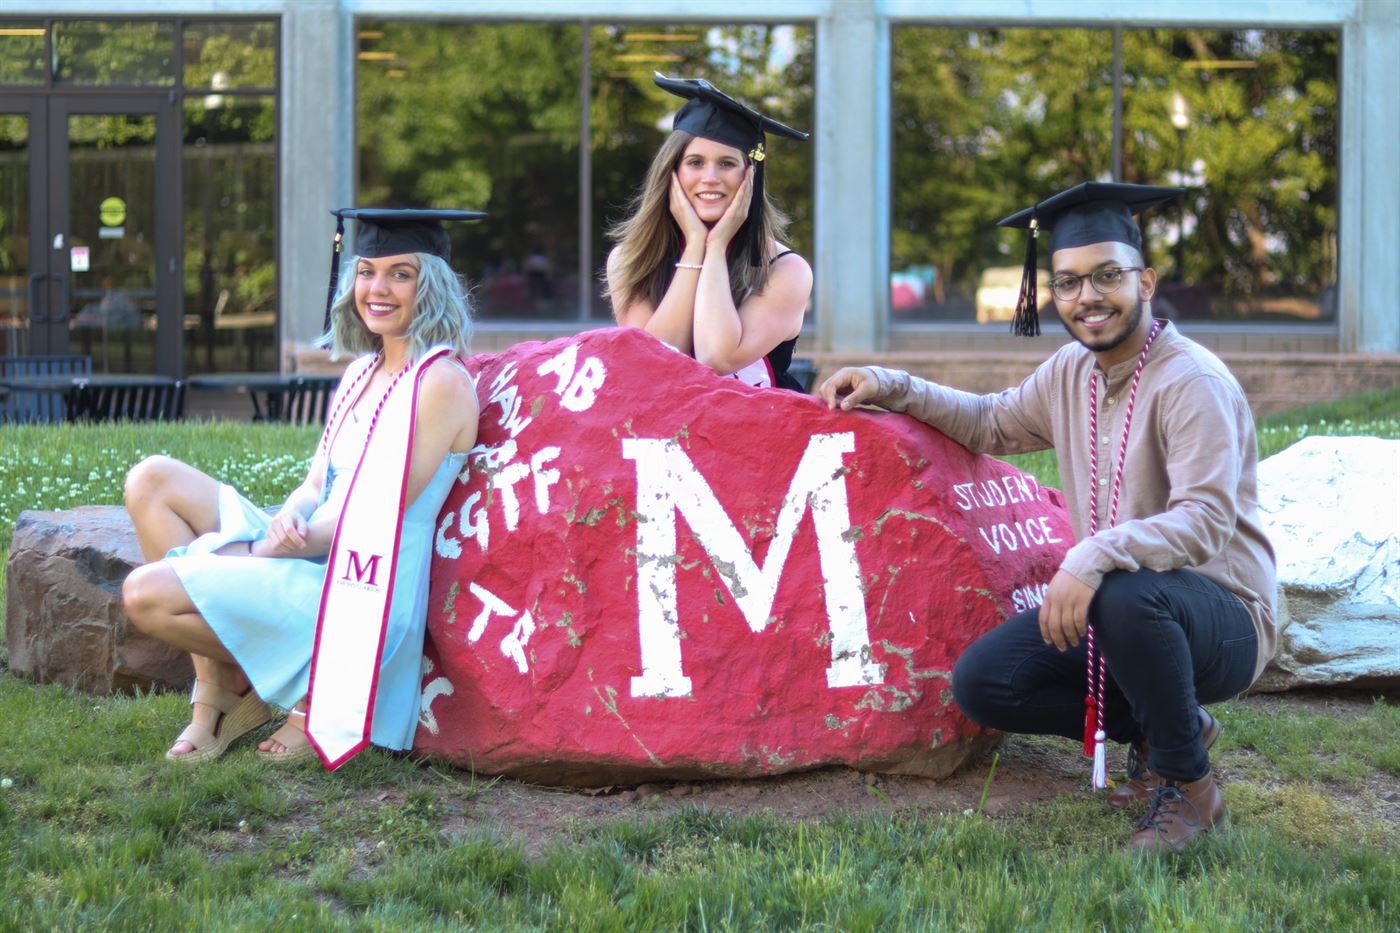 Managing Editor, Editor-in-Chief and Web Editor pose on The Monclarion's rock. Adrian Maldonado | The Montclarion